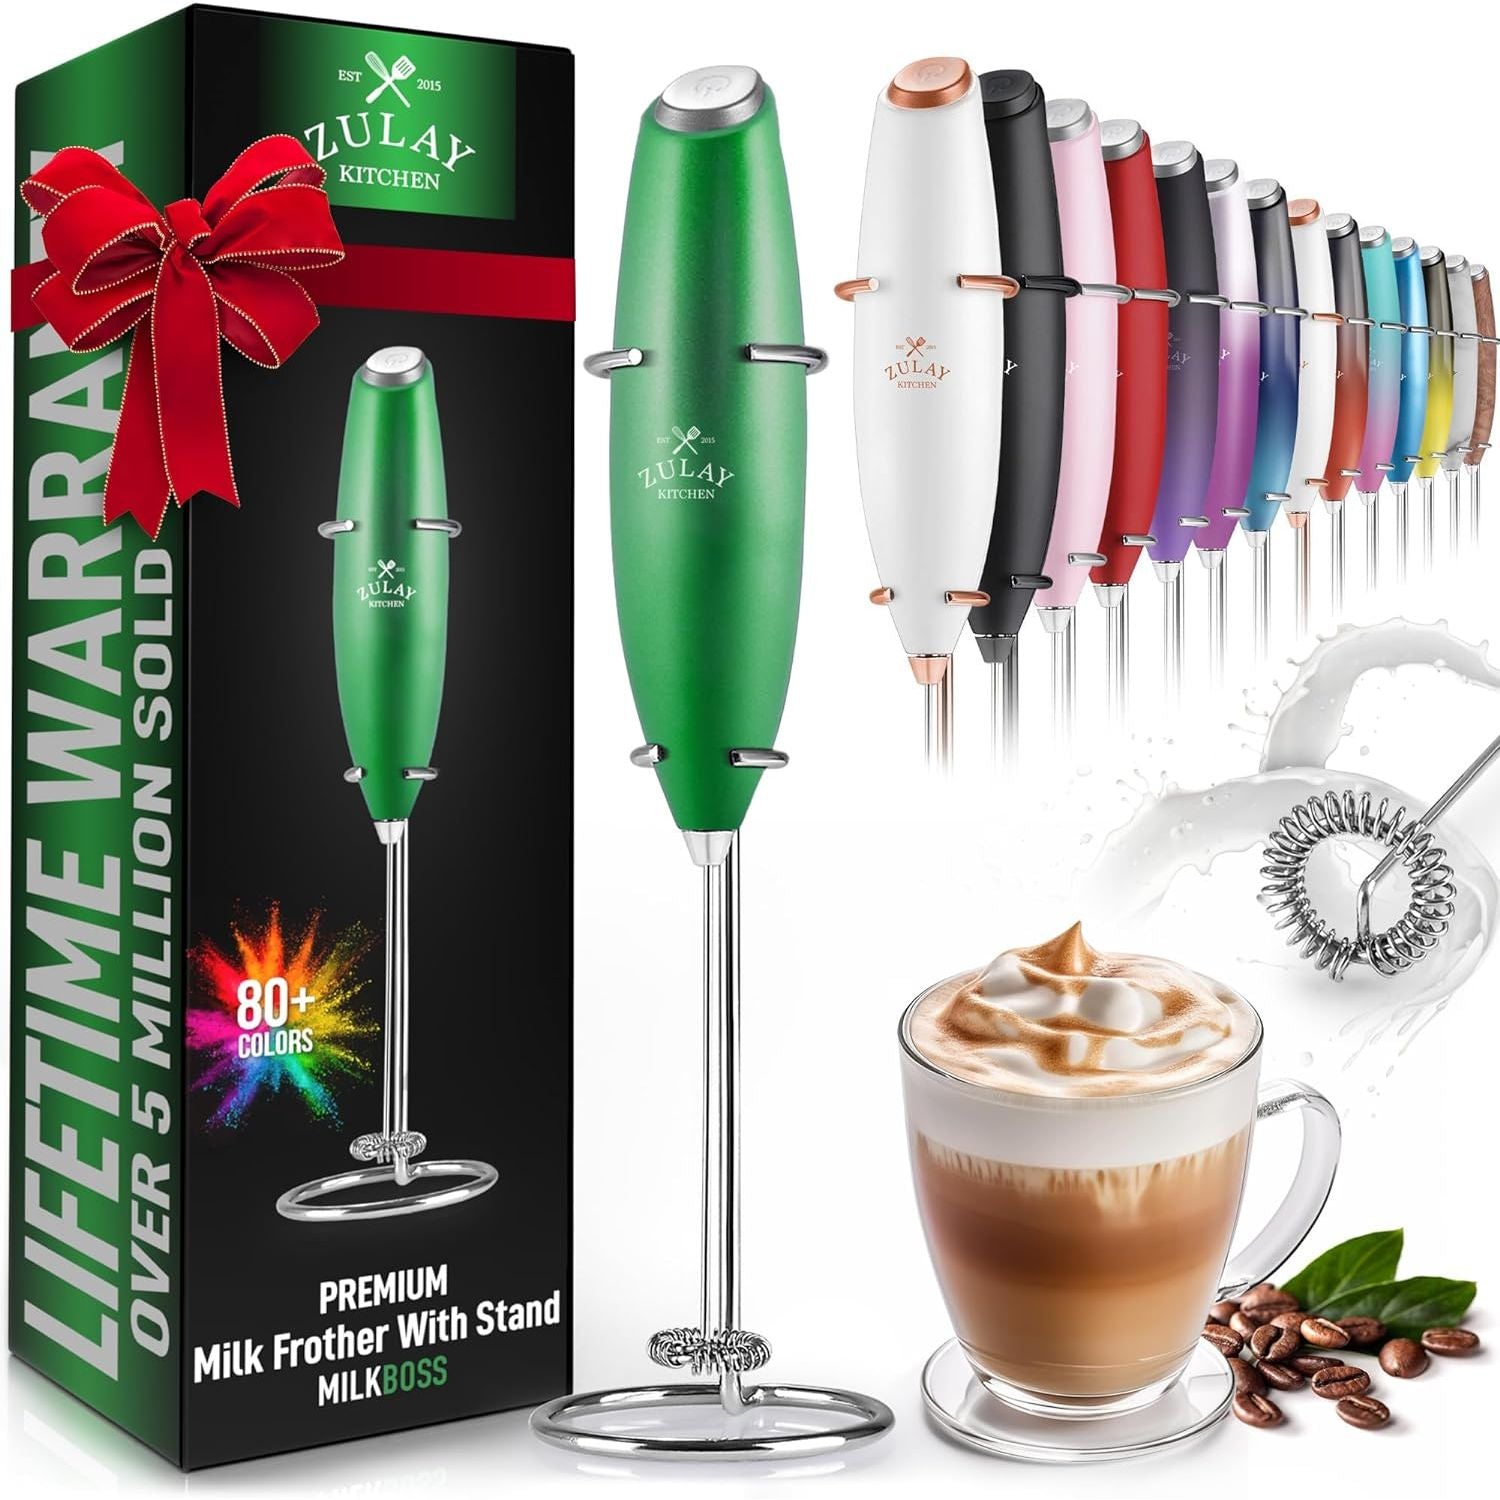 Powerful Handheld Milk Frother by Zulay Kitchen